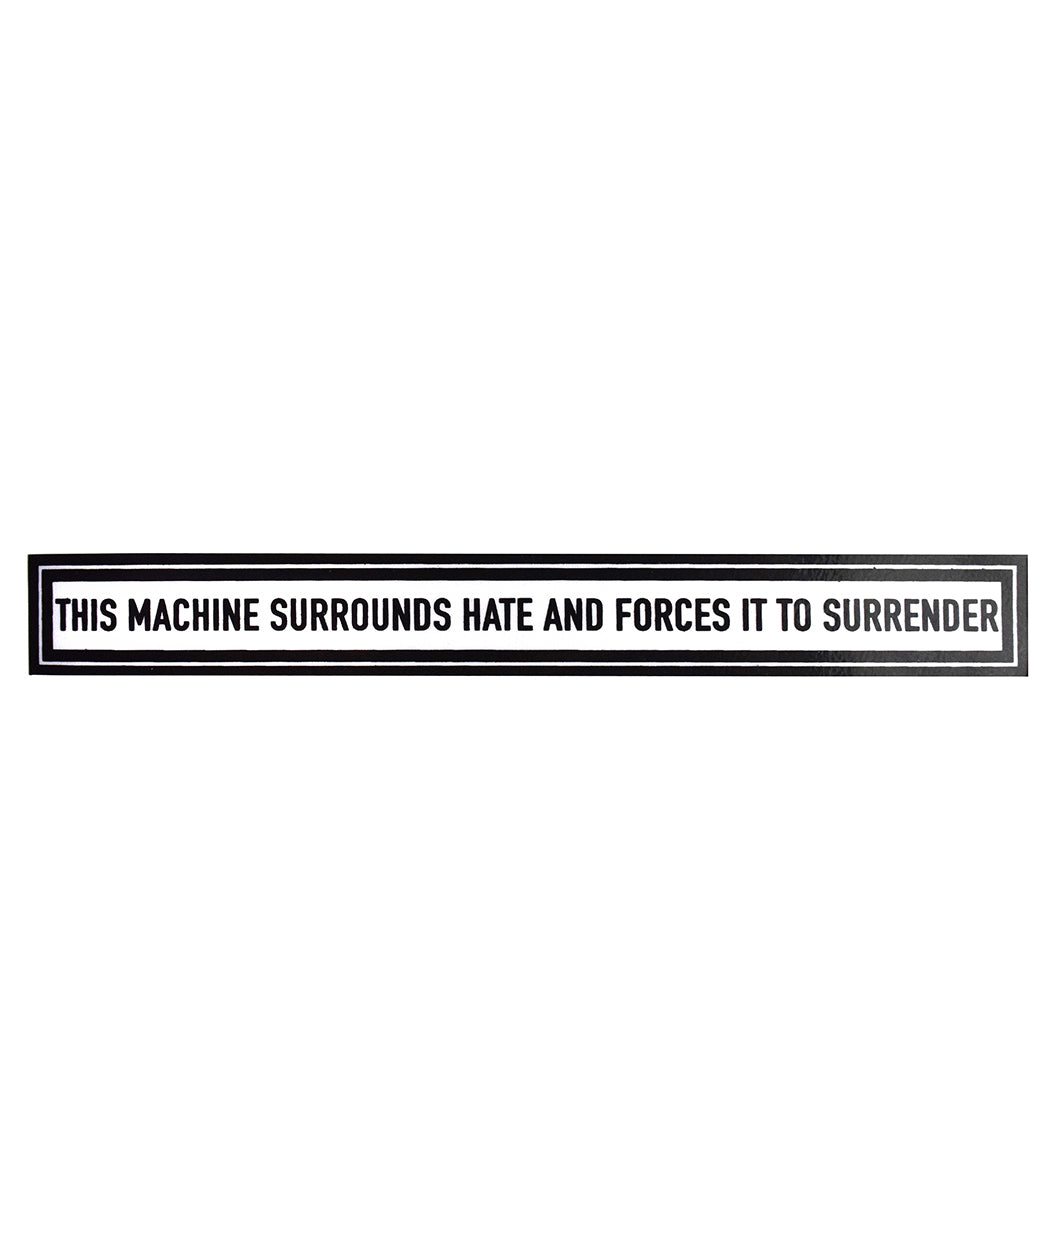 Long rectangular sticker with two black borders surrounding “This Machine Surrounds Hate and Forces It To Surrender” in black sans serif font - from John Green